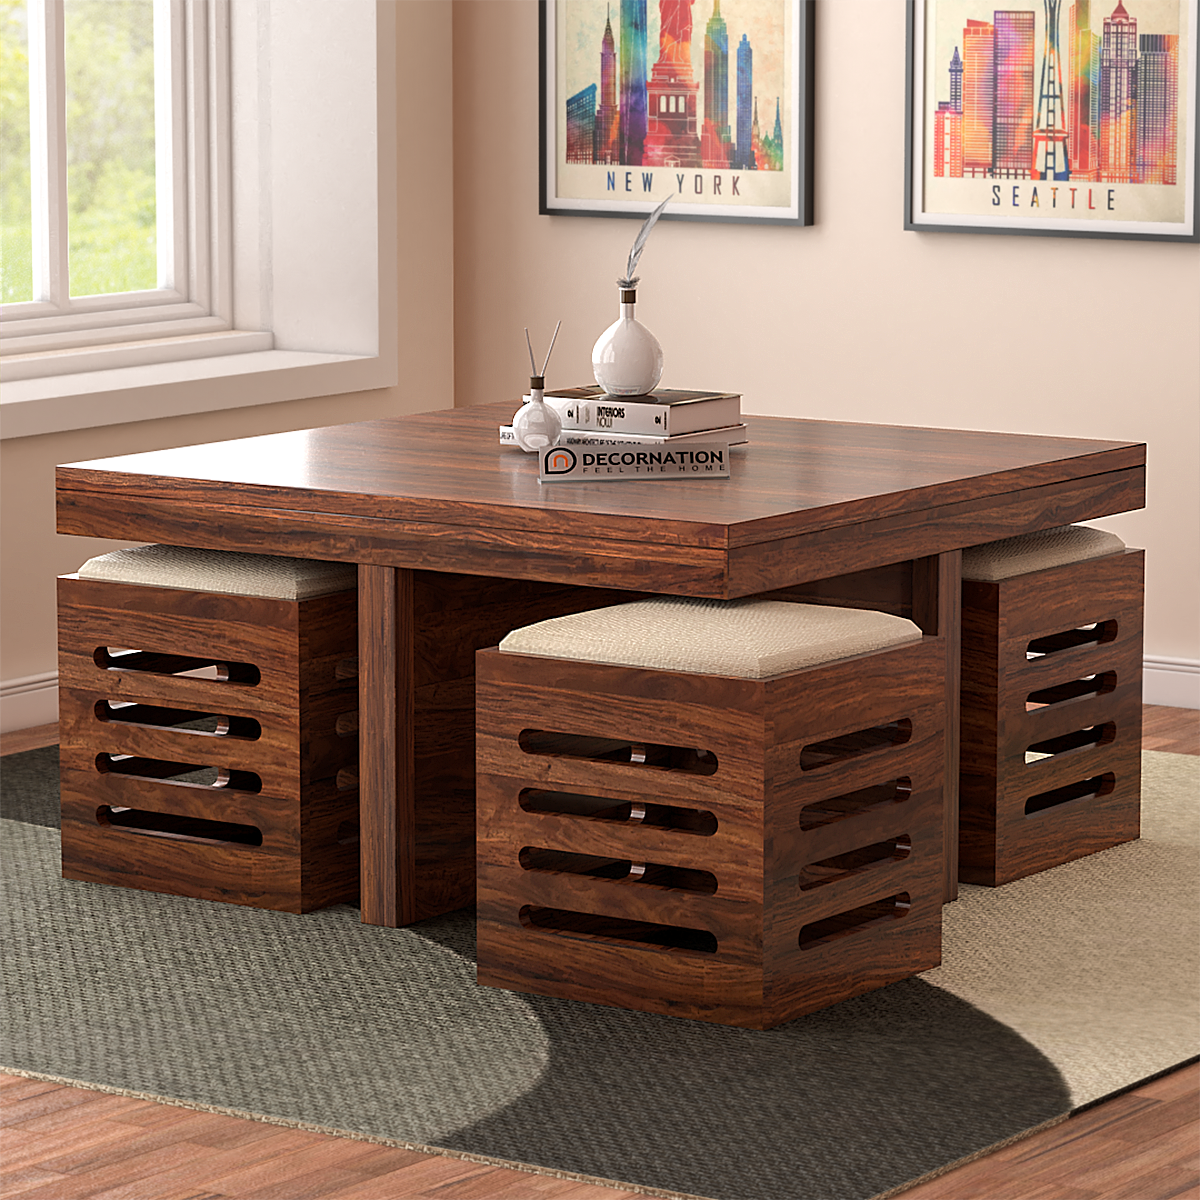 Edinburgh Solid Wood Coffee Table With 4 Cubical Stools – Natural Regarding Coffee Tables For 4 6 People (View 11 of 15)